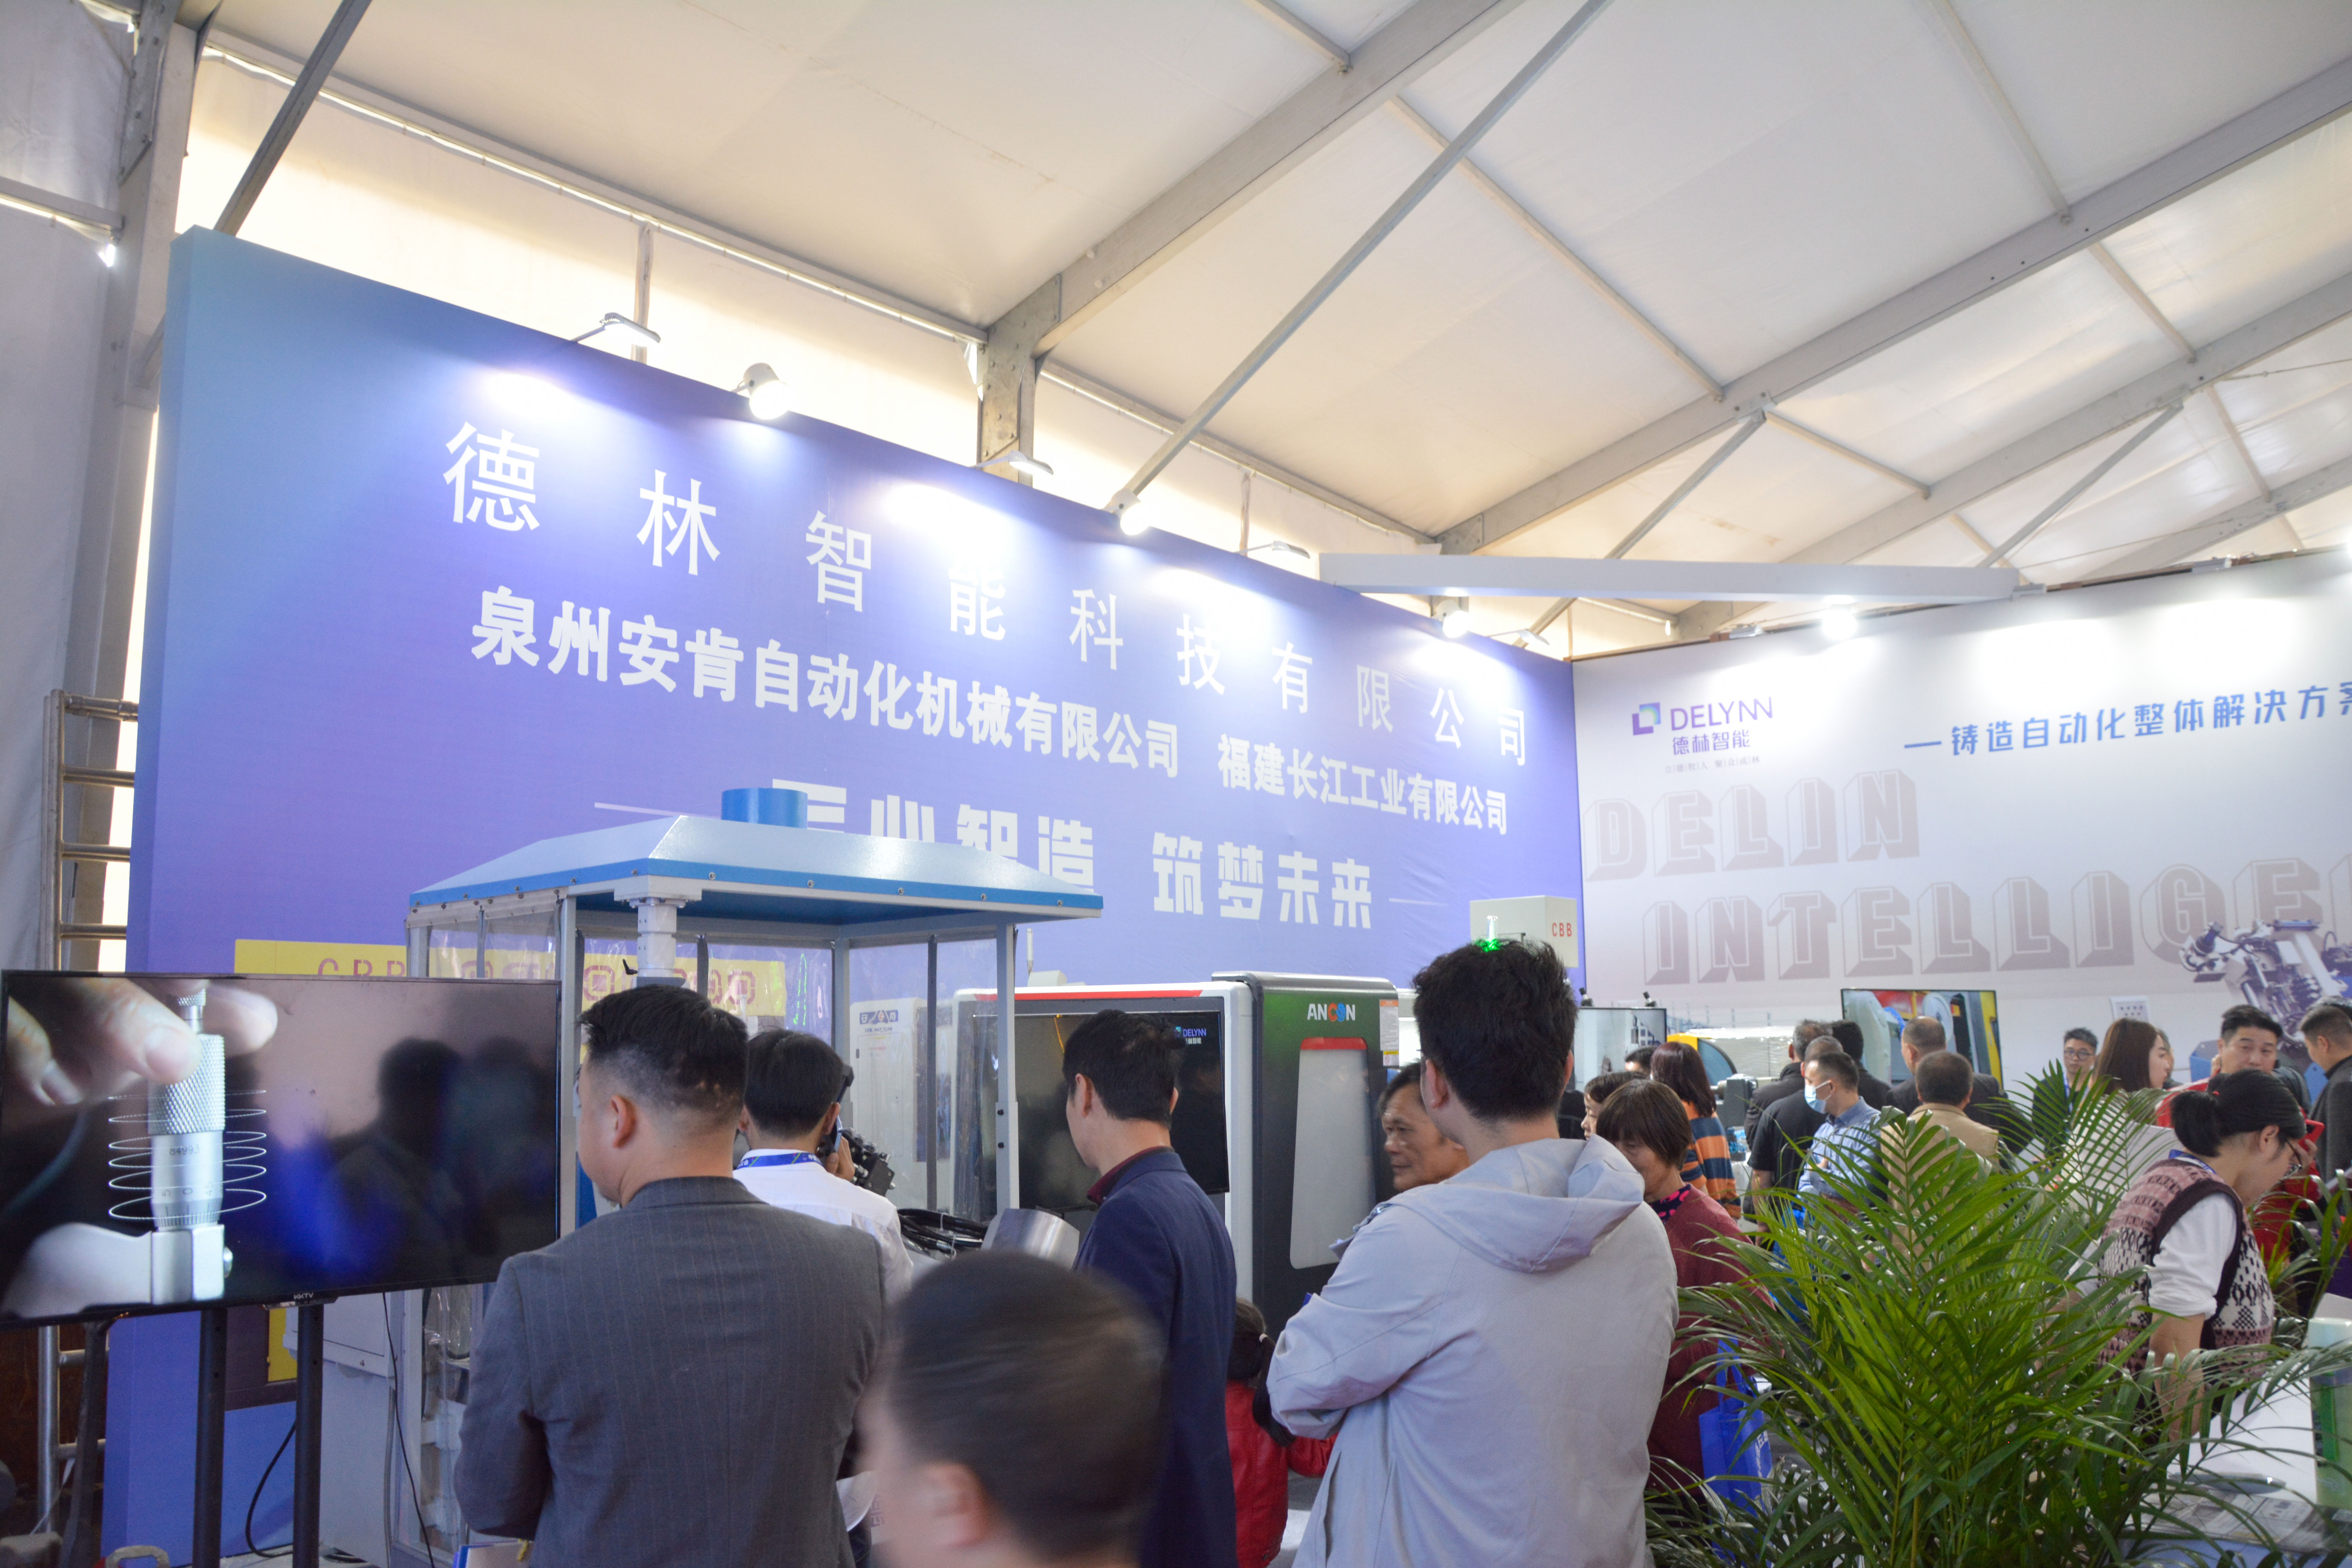 During the exhibition|Delin Intelligent Exhibition Hall is full of excitement and popularity!